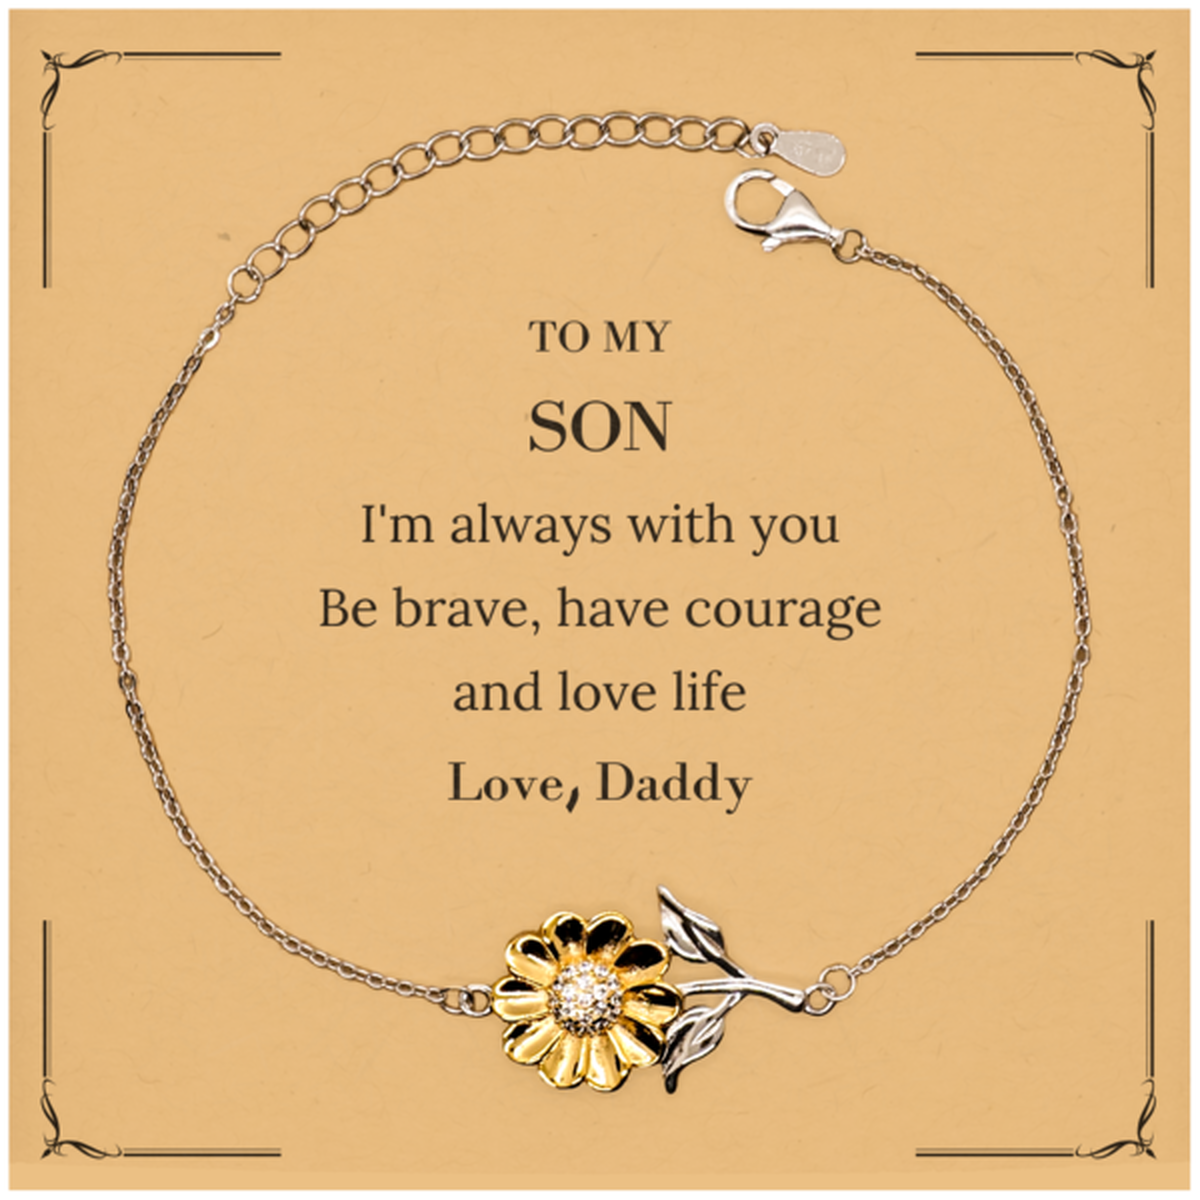 To My Son Gifts from Daddy, Unique Sunflower Bracelet Inspirational Christmas Birthday Graduation Gifts for Son I'm always with you. Be brave, have courage and love life. Love, Daddy